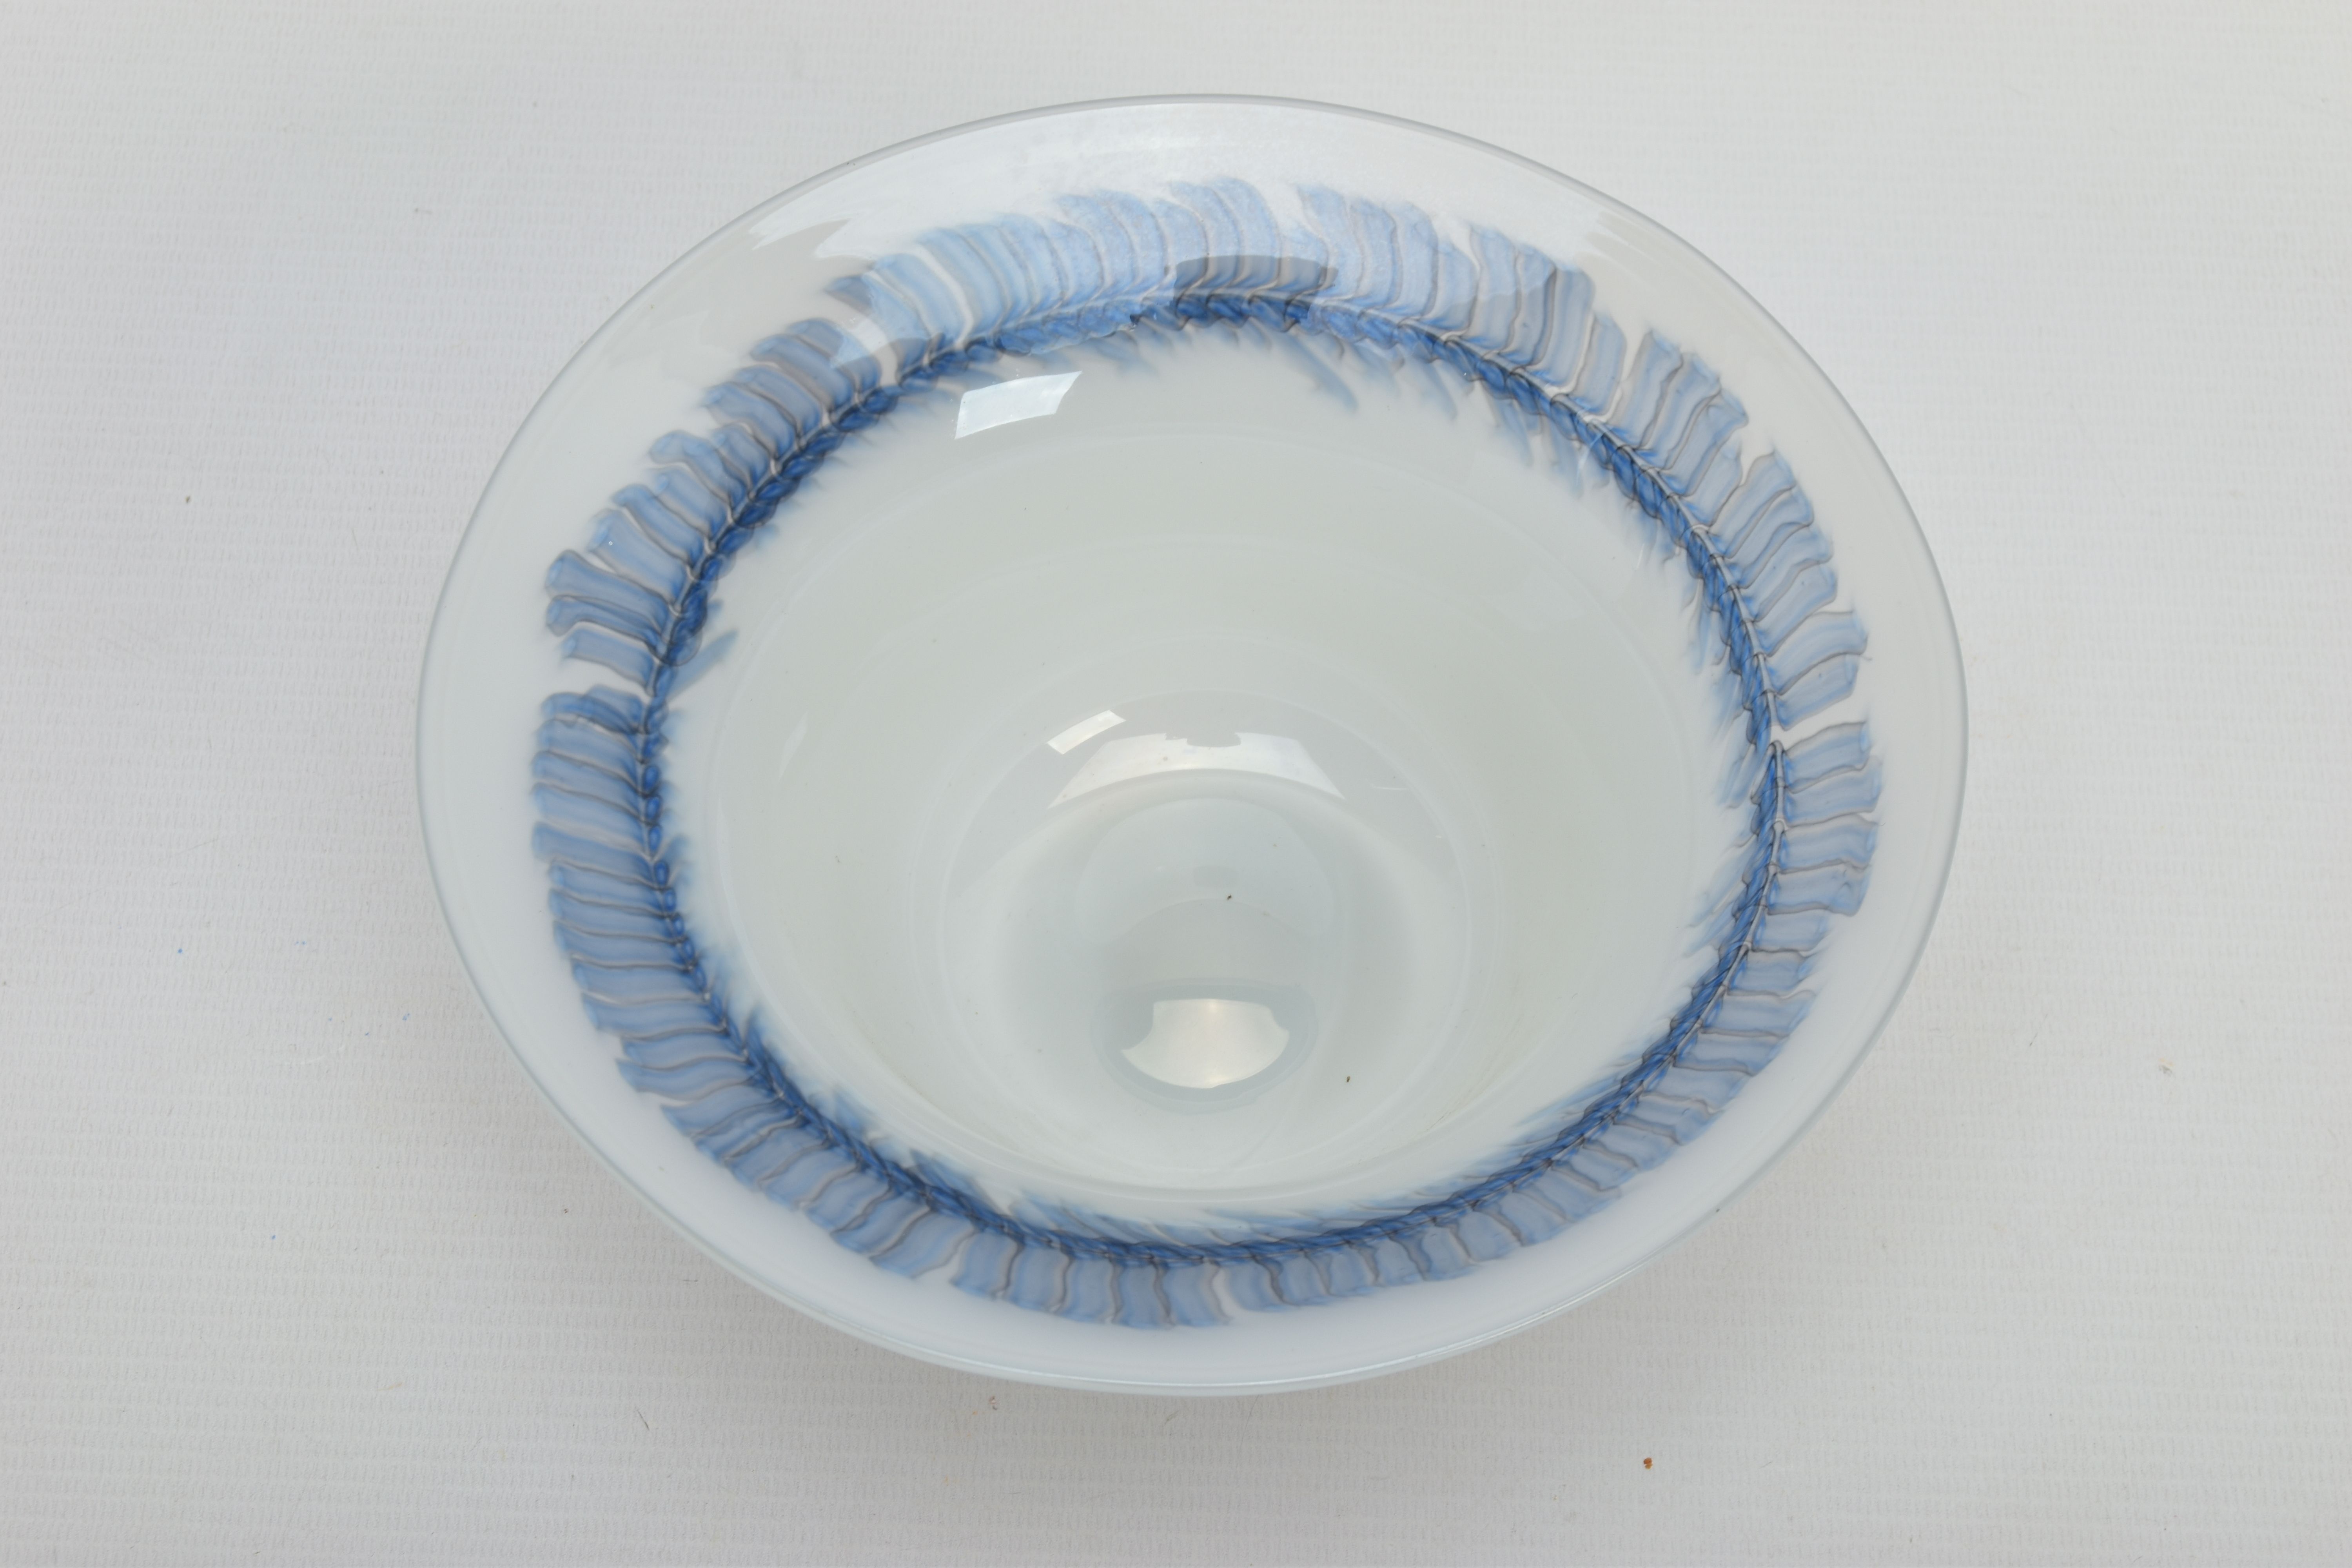 MALCOM SUTCLIFFE (BRITISH CONTEMPORARY) A WHITE FOOTED BOWL WITH BLUE DECORATION TO THE RIM, - Image 2 of 6